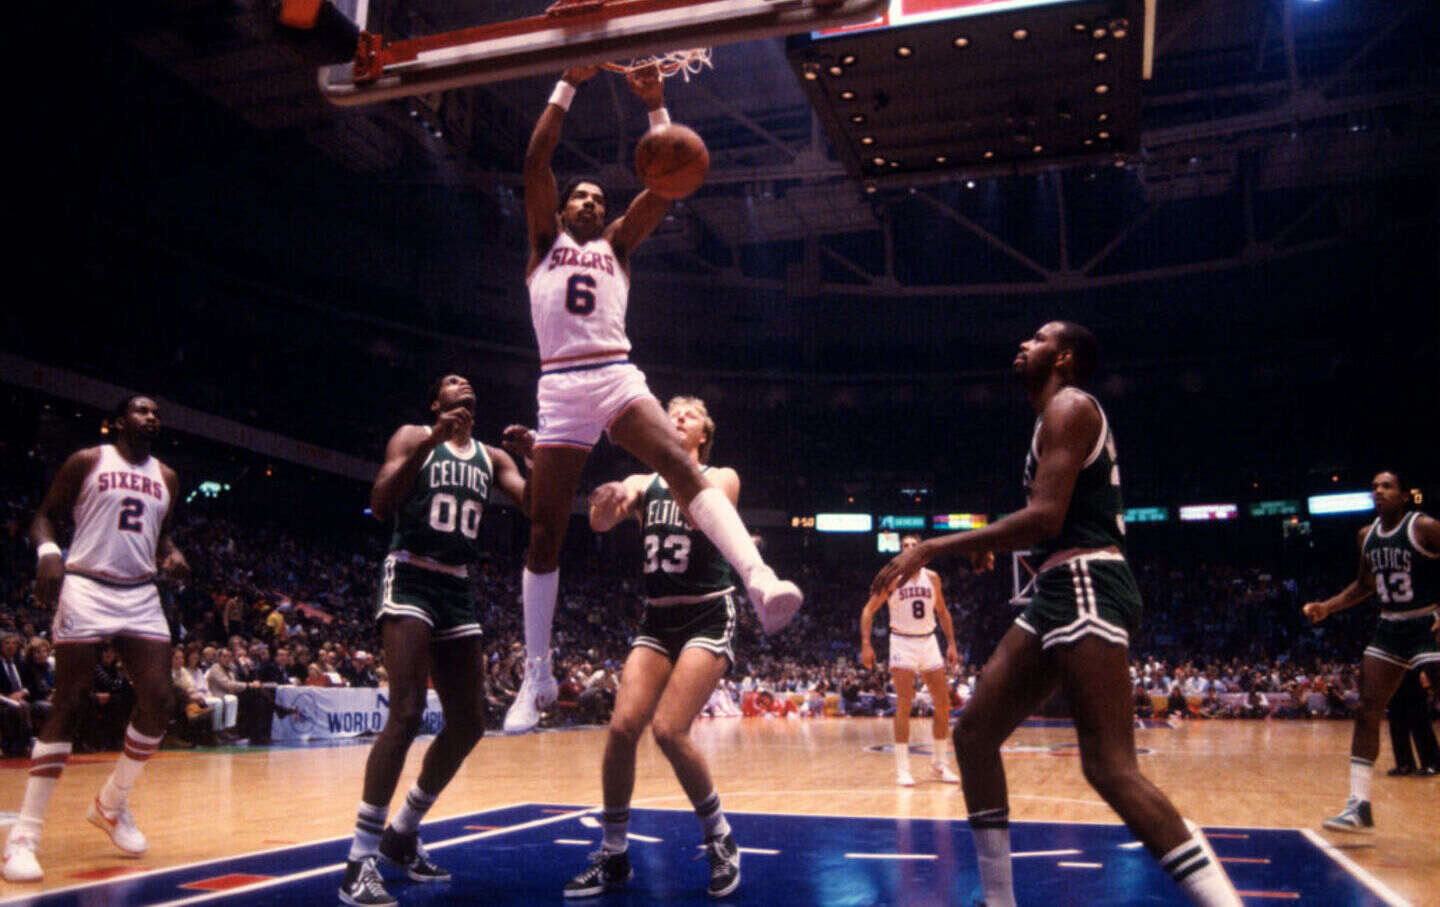 Julius Erving #6 of the Philadelphia 76ers dunks against Larry Bird #33 and Robert Parish #00 of the Boston Celtics during a game at the Spectrum in 1982.